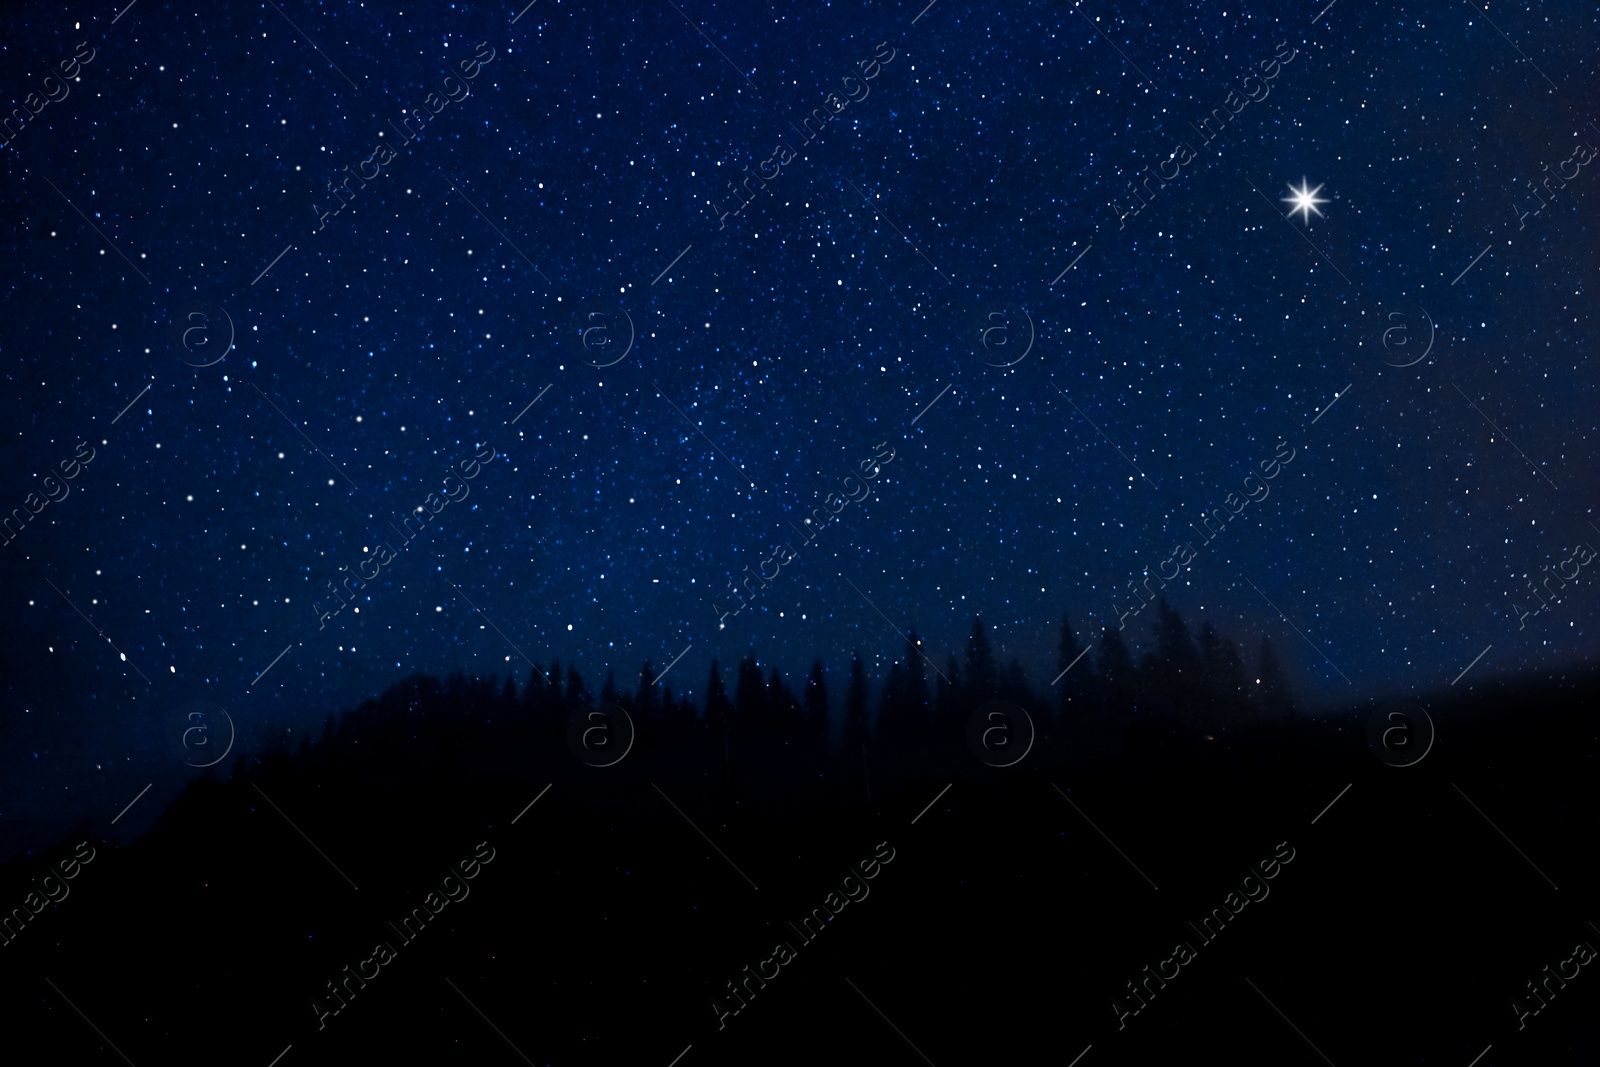 Image of Countless twinkling stars in night sky over forest